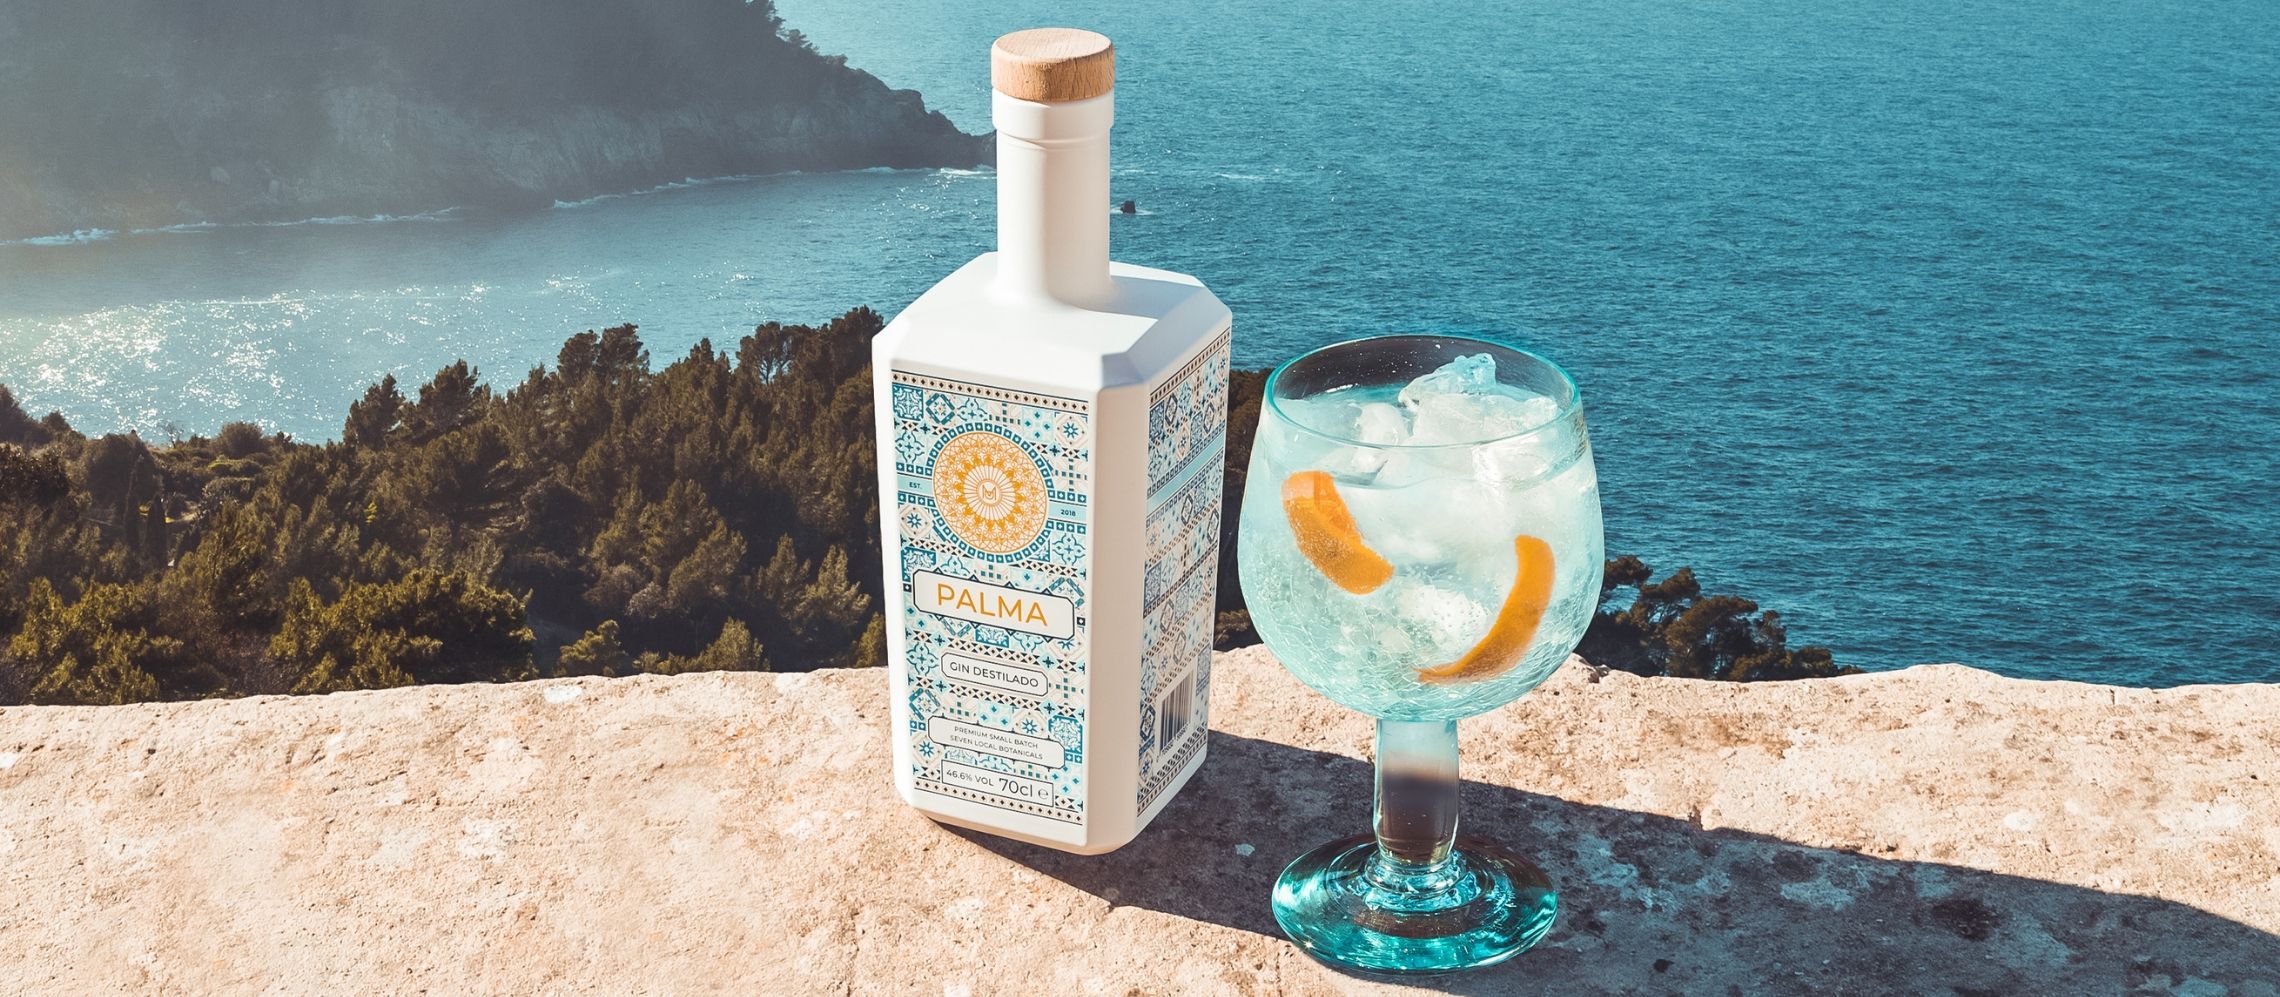 Photo for: Palma Gin Entitled the Best Spirit by Package 